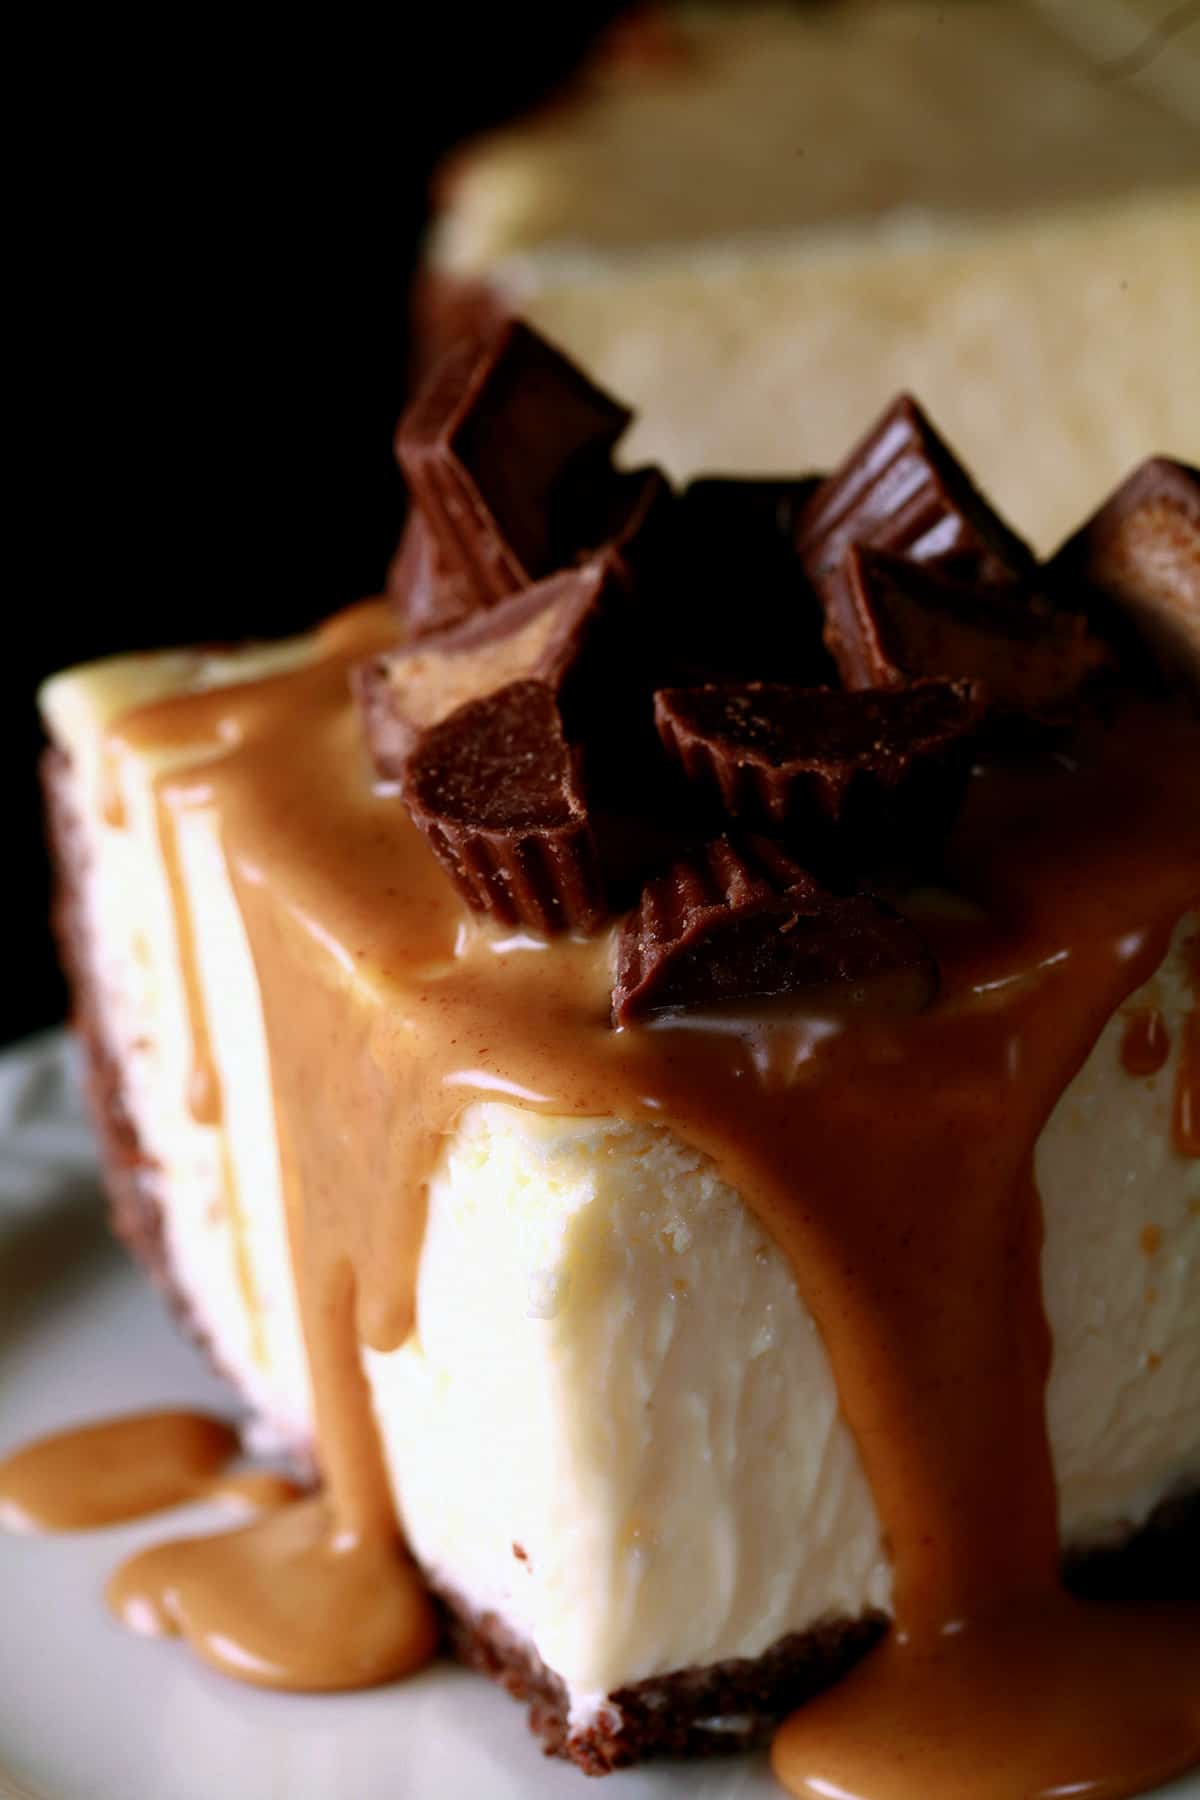 A close up view of a slice of peanut butter cup cheesecake.